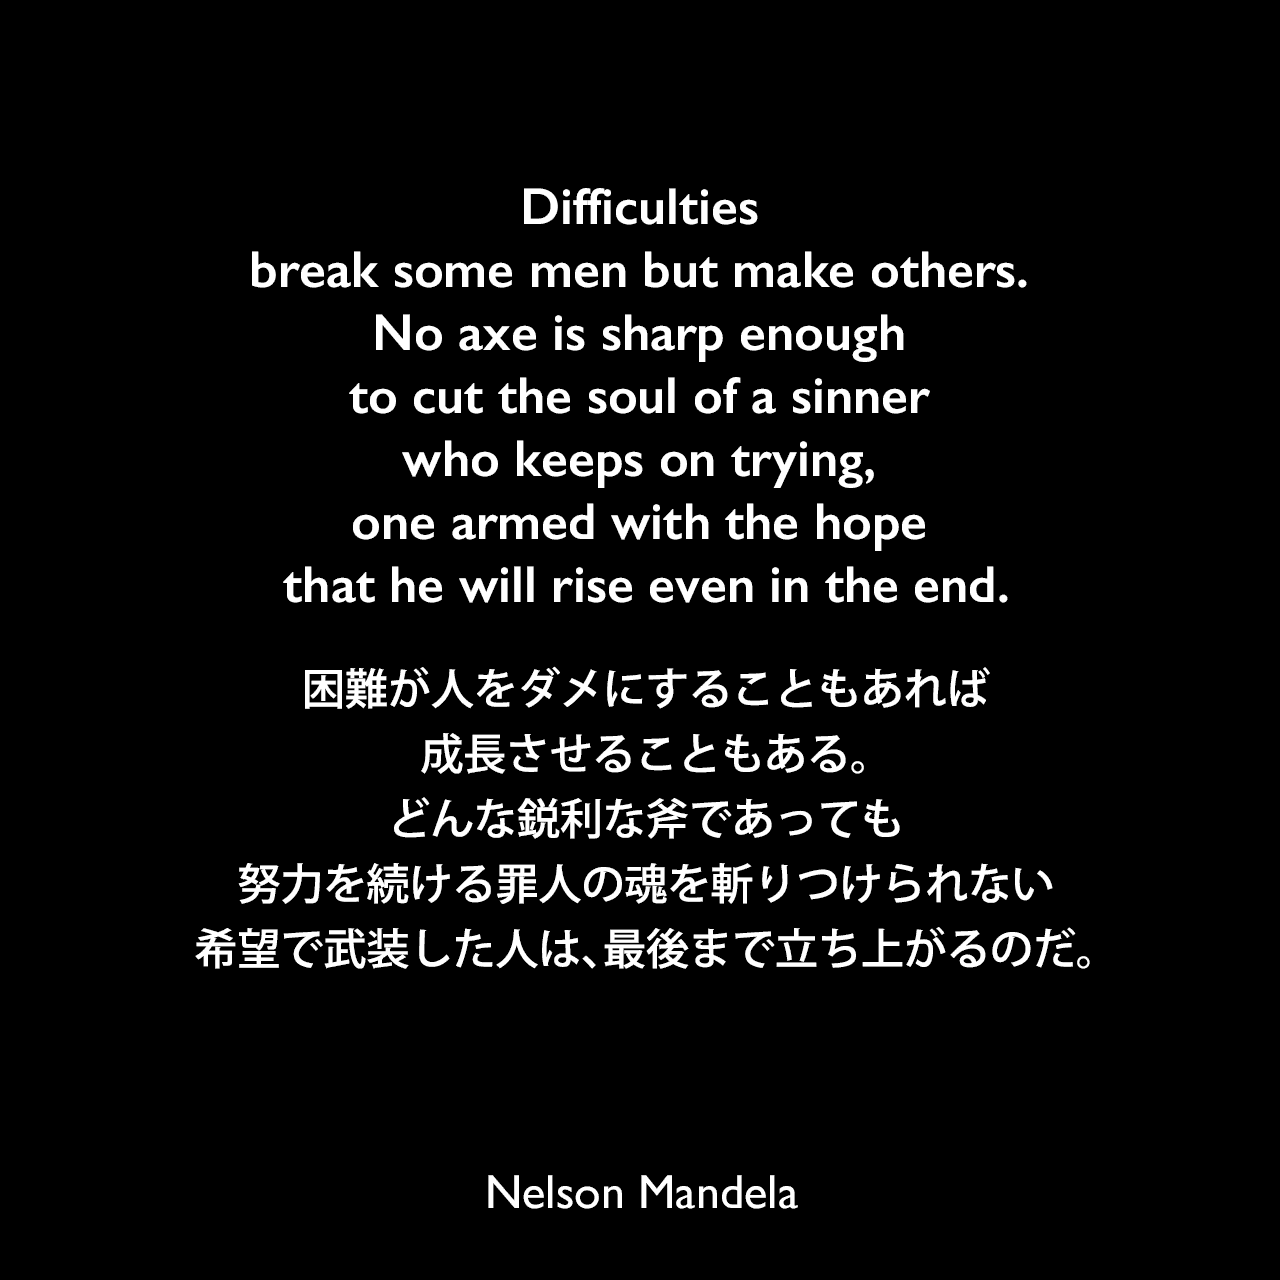 Difficulties break some men but make others. No axe is sharp enough to cut the soul of a sinner who keeps on trying, one armed with the hope that he will rise even in the end.困難が人をダメにすることもあれば、成長させることもある。どんな鋭利な斧であっても、努力を続ける罪人の魂を斬りつけられない、希望で武装した人は、最後まで立ち上がるのだ。- ネルソン・マンデラの2番目の妻、ウィニー・マンデラへ宛てた手紙よりNelson Mandela